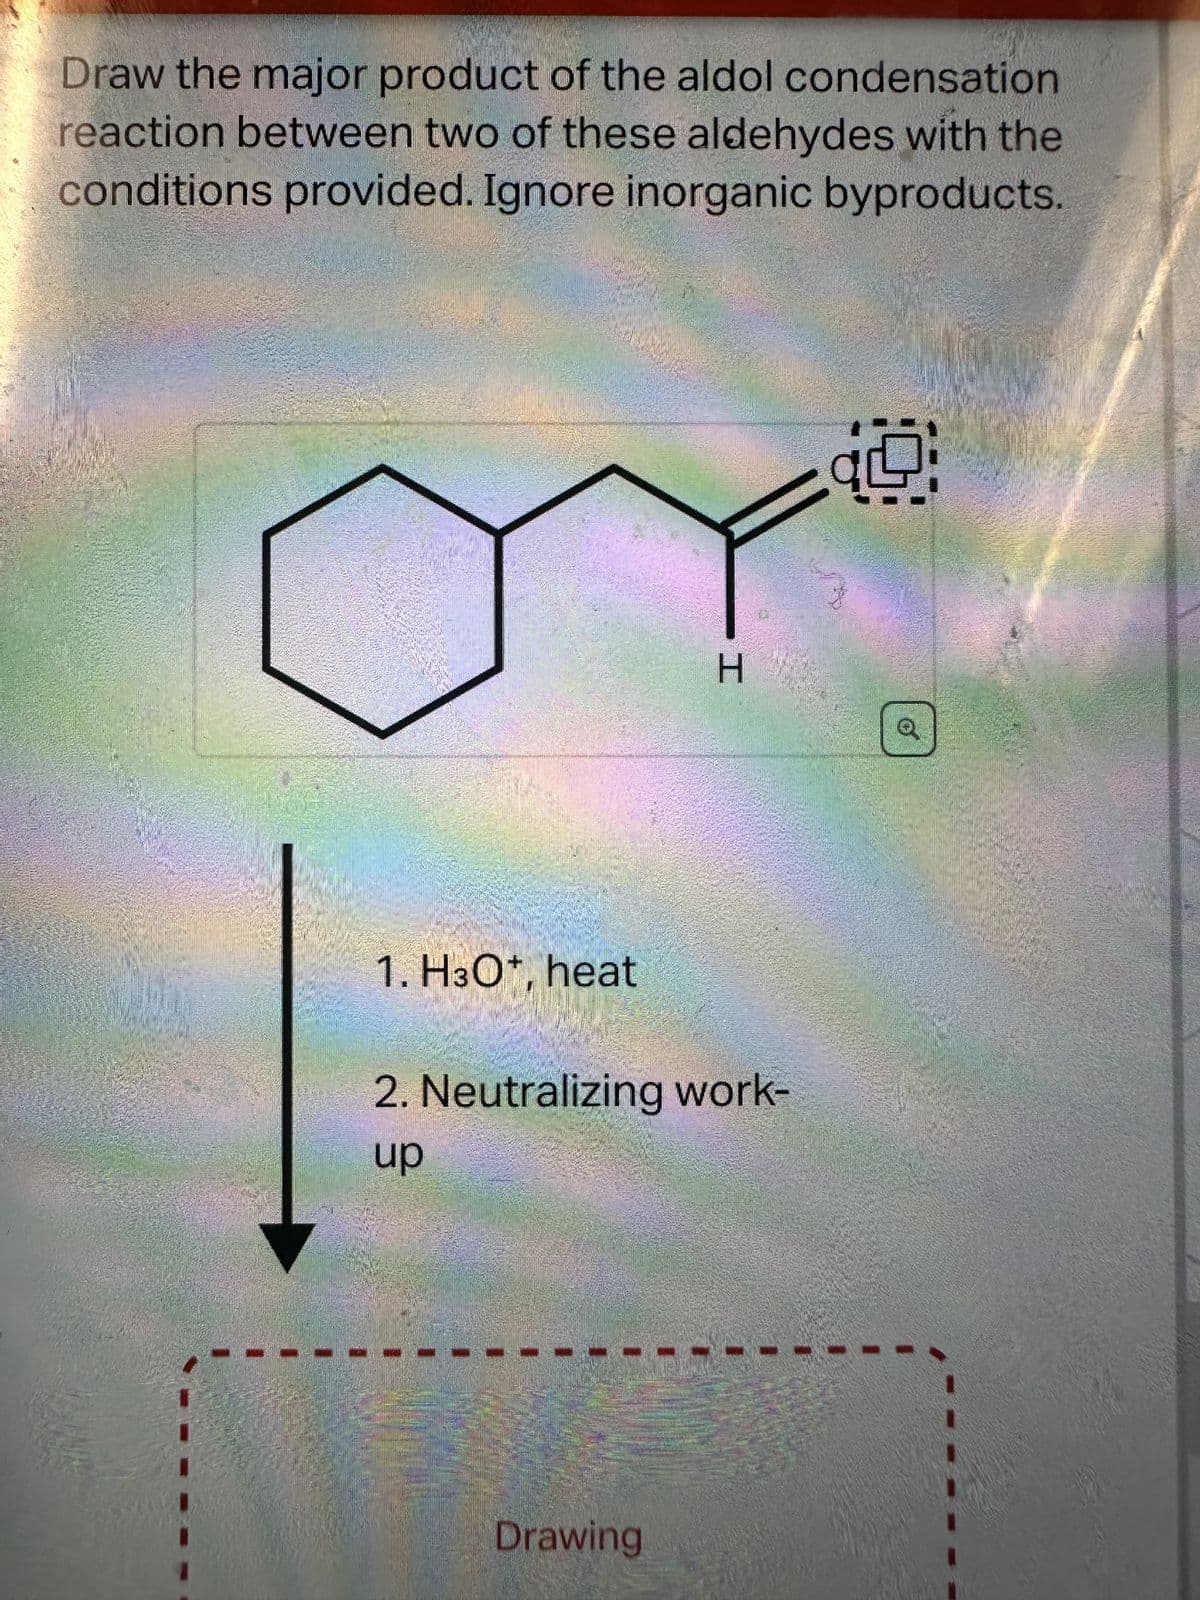 Draw the major product of the aldol condensation
reaction between two of these aldehydes with the
conditions provided. Ignore inorganic byproducts.
1. H3O+, heat
H
2. Neutralizing work-
up
Drawing
1.9